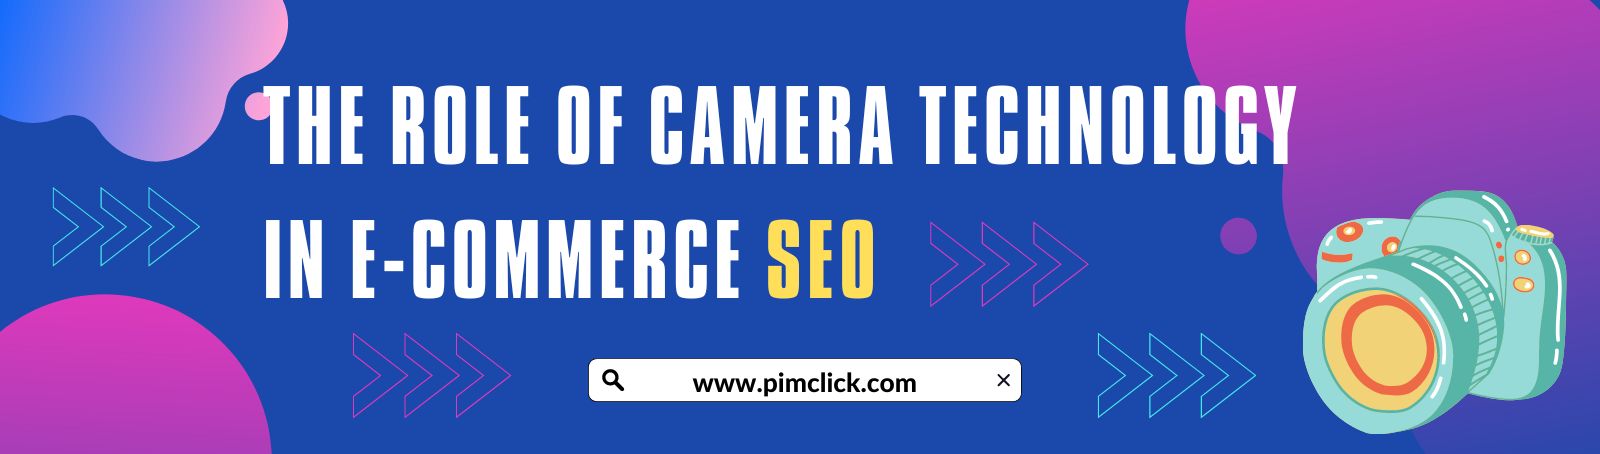 the-role-of camera-technology-in-e-commerce-seo